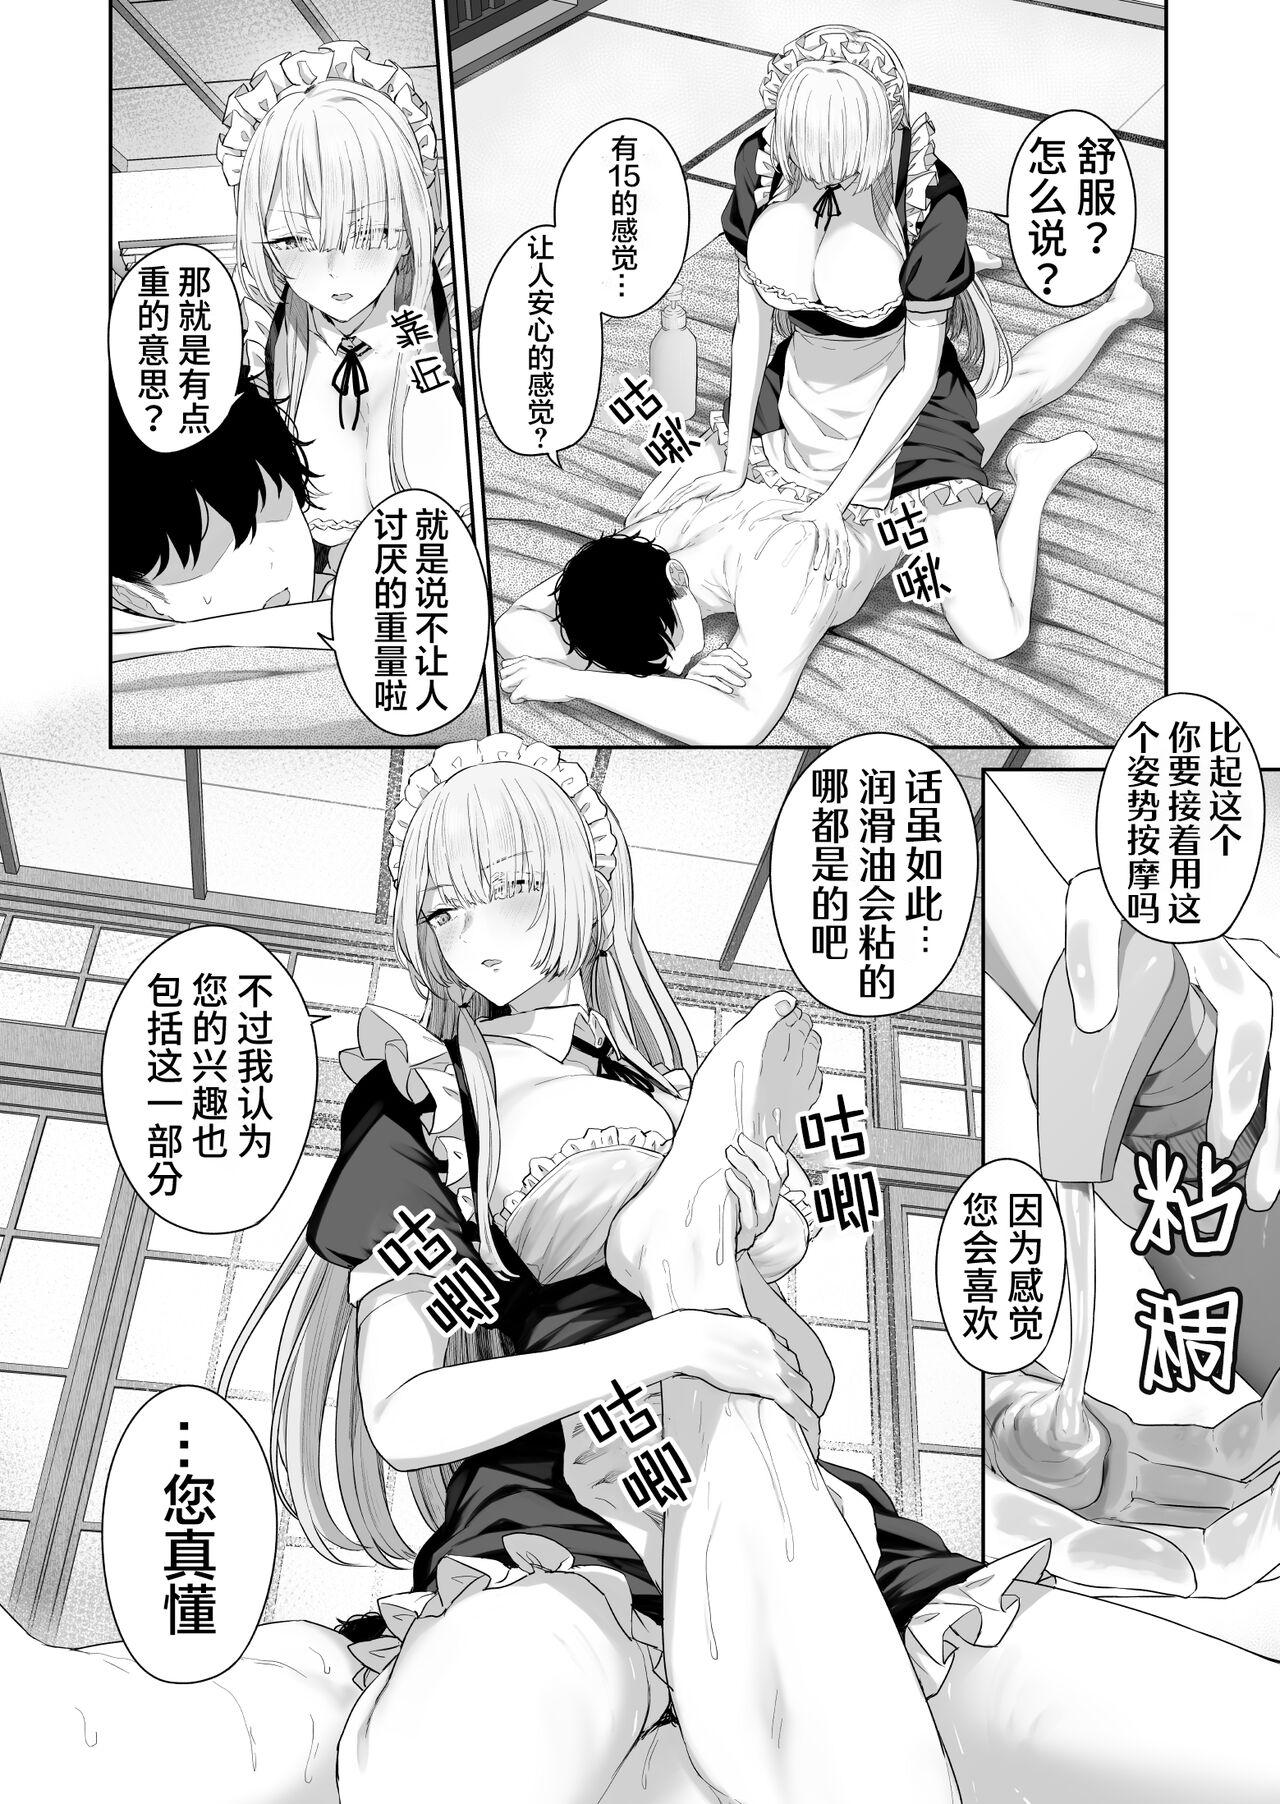 Pussyfucking AK15の進捗1 - Girls frontline Cameltoe - Page 5